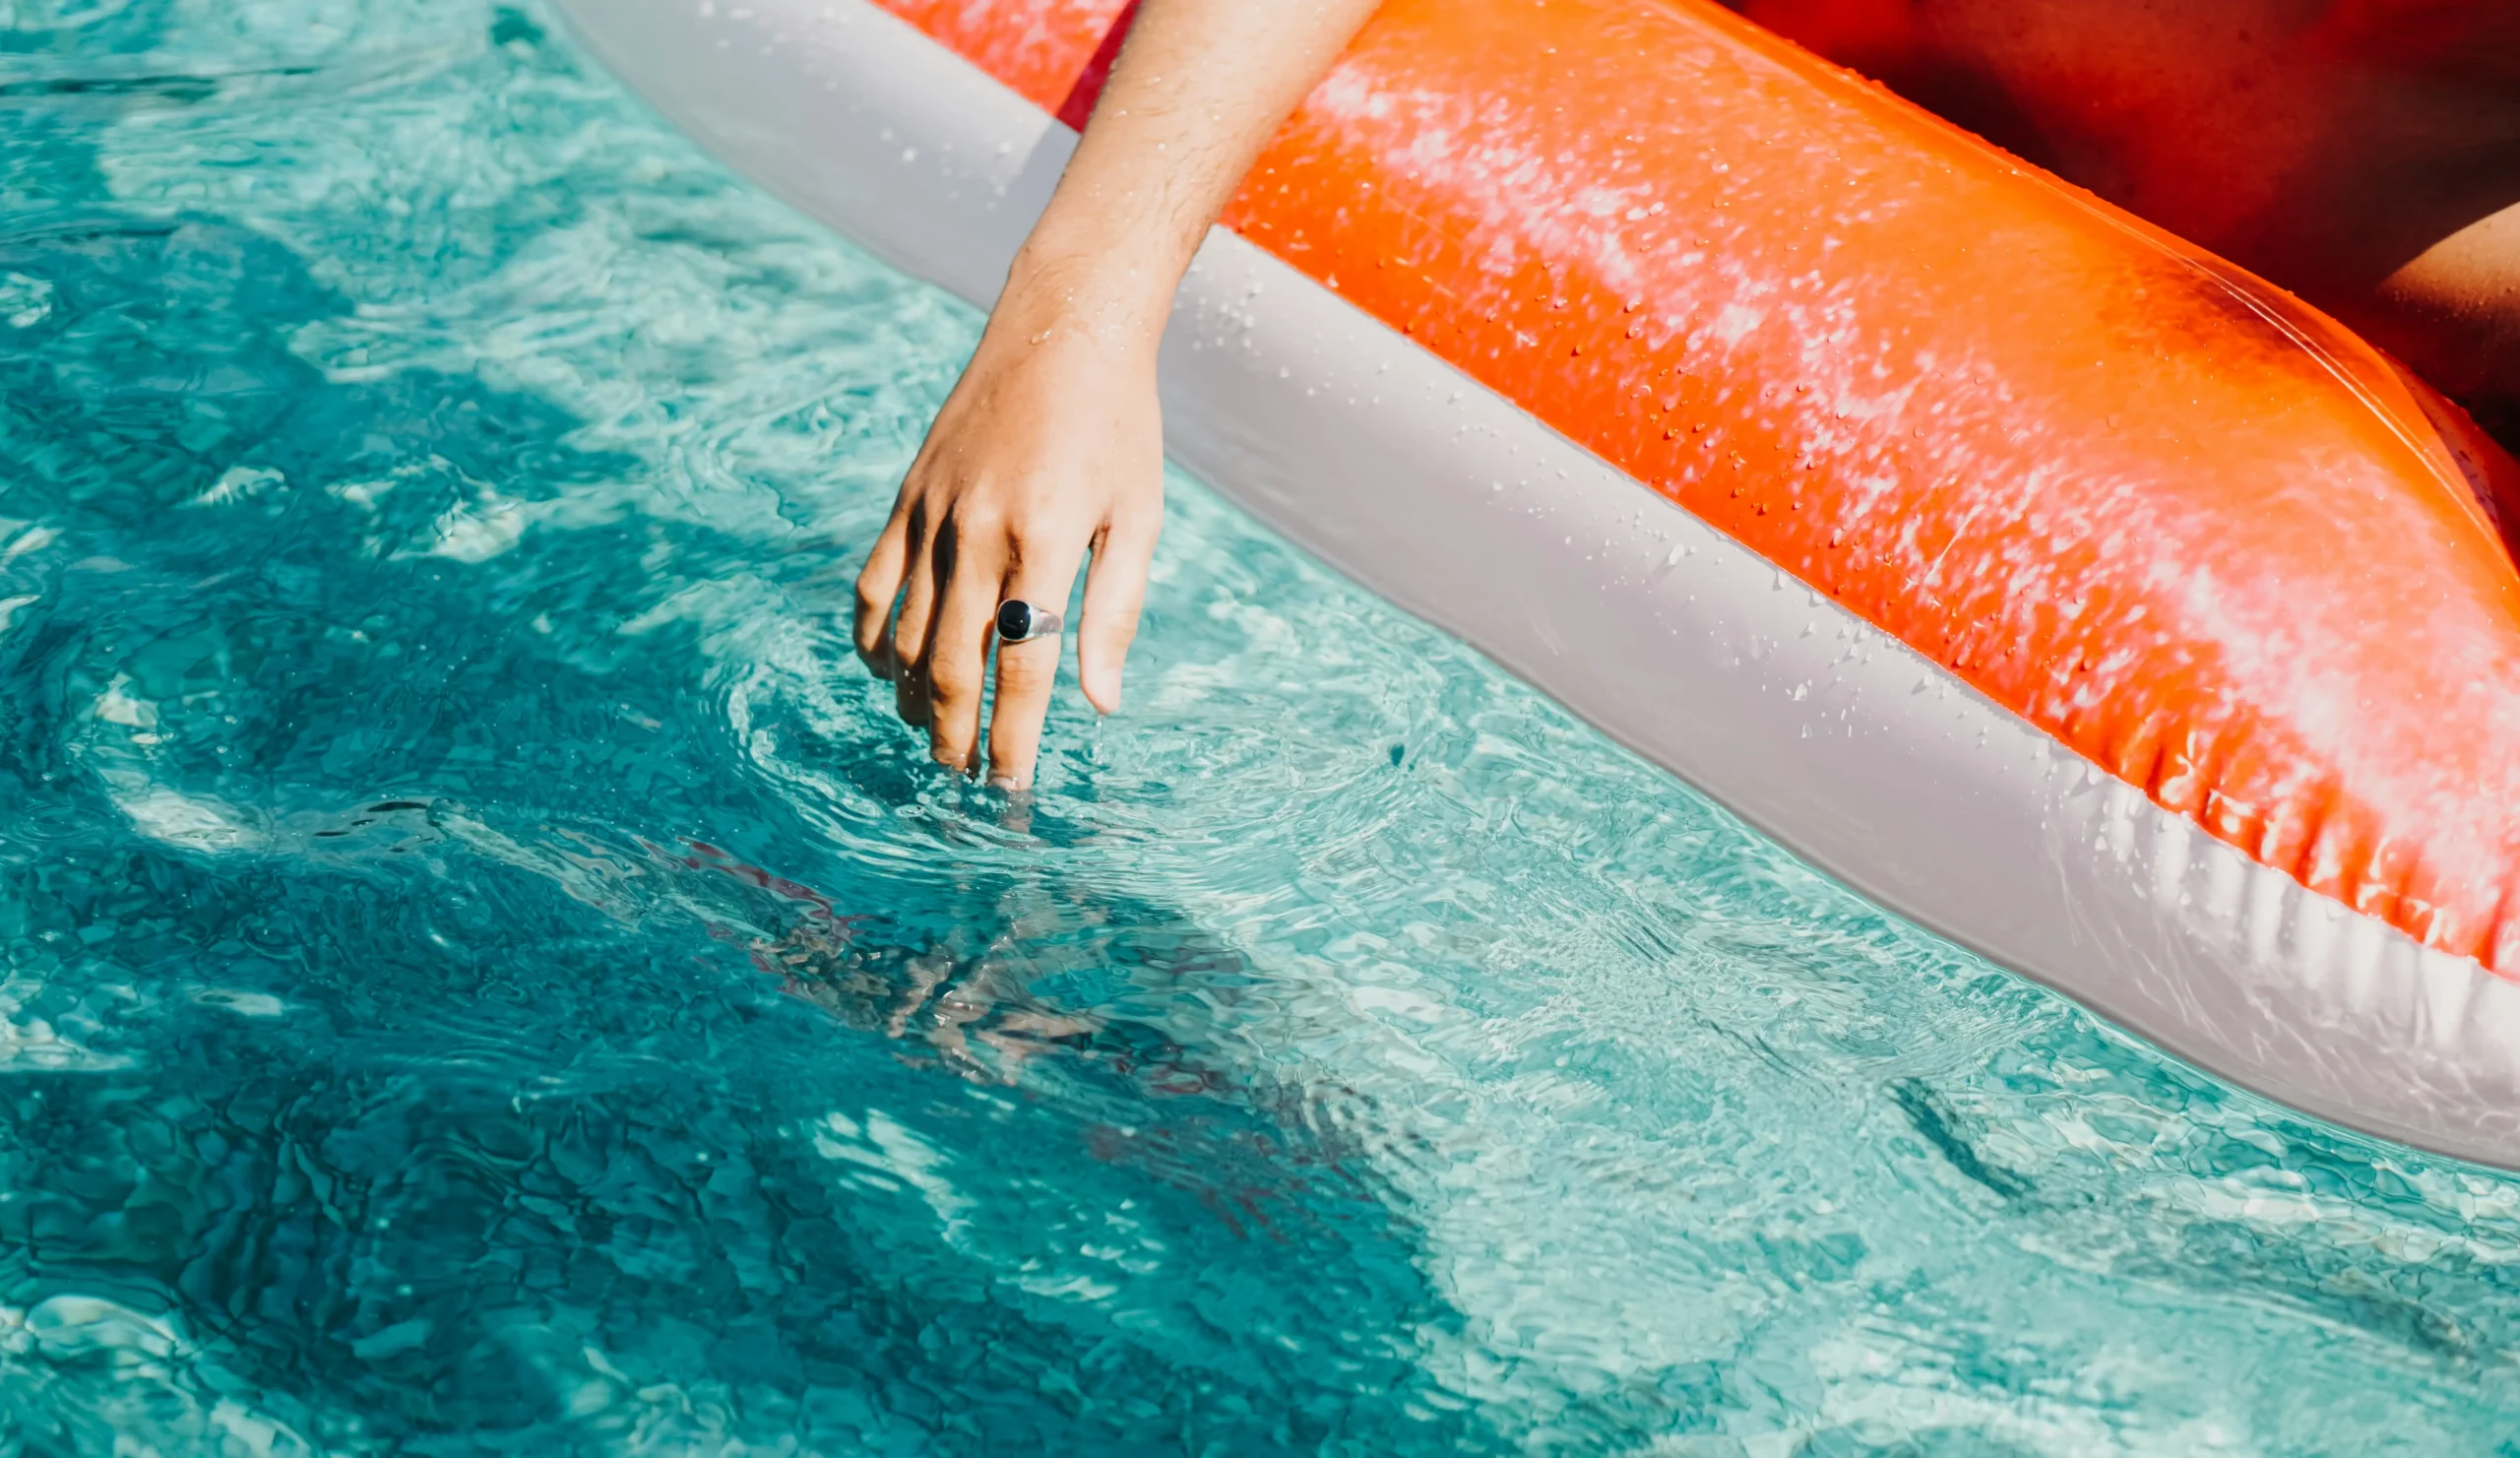 Close up of an inflatable pool toy with a female hand dipping into the water, the sun is shining